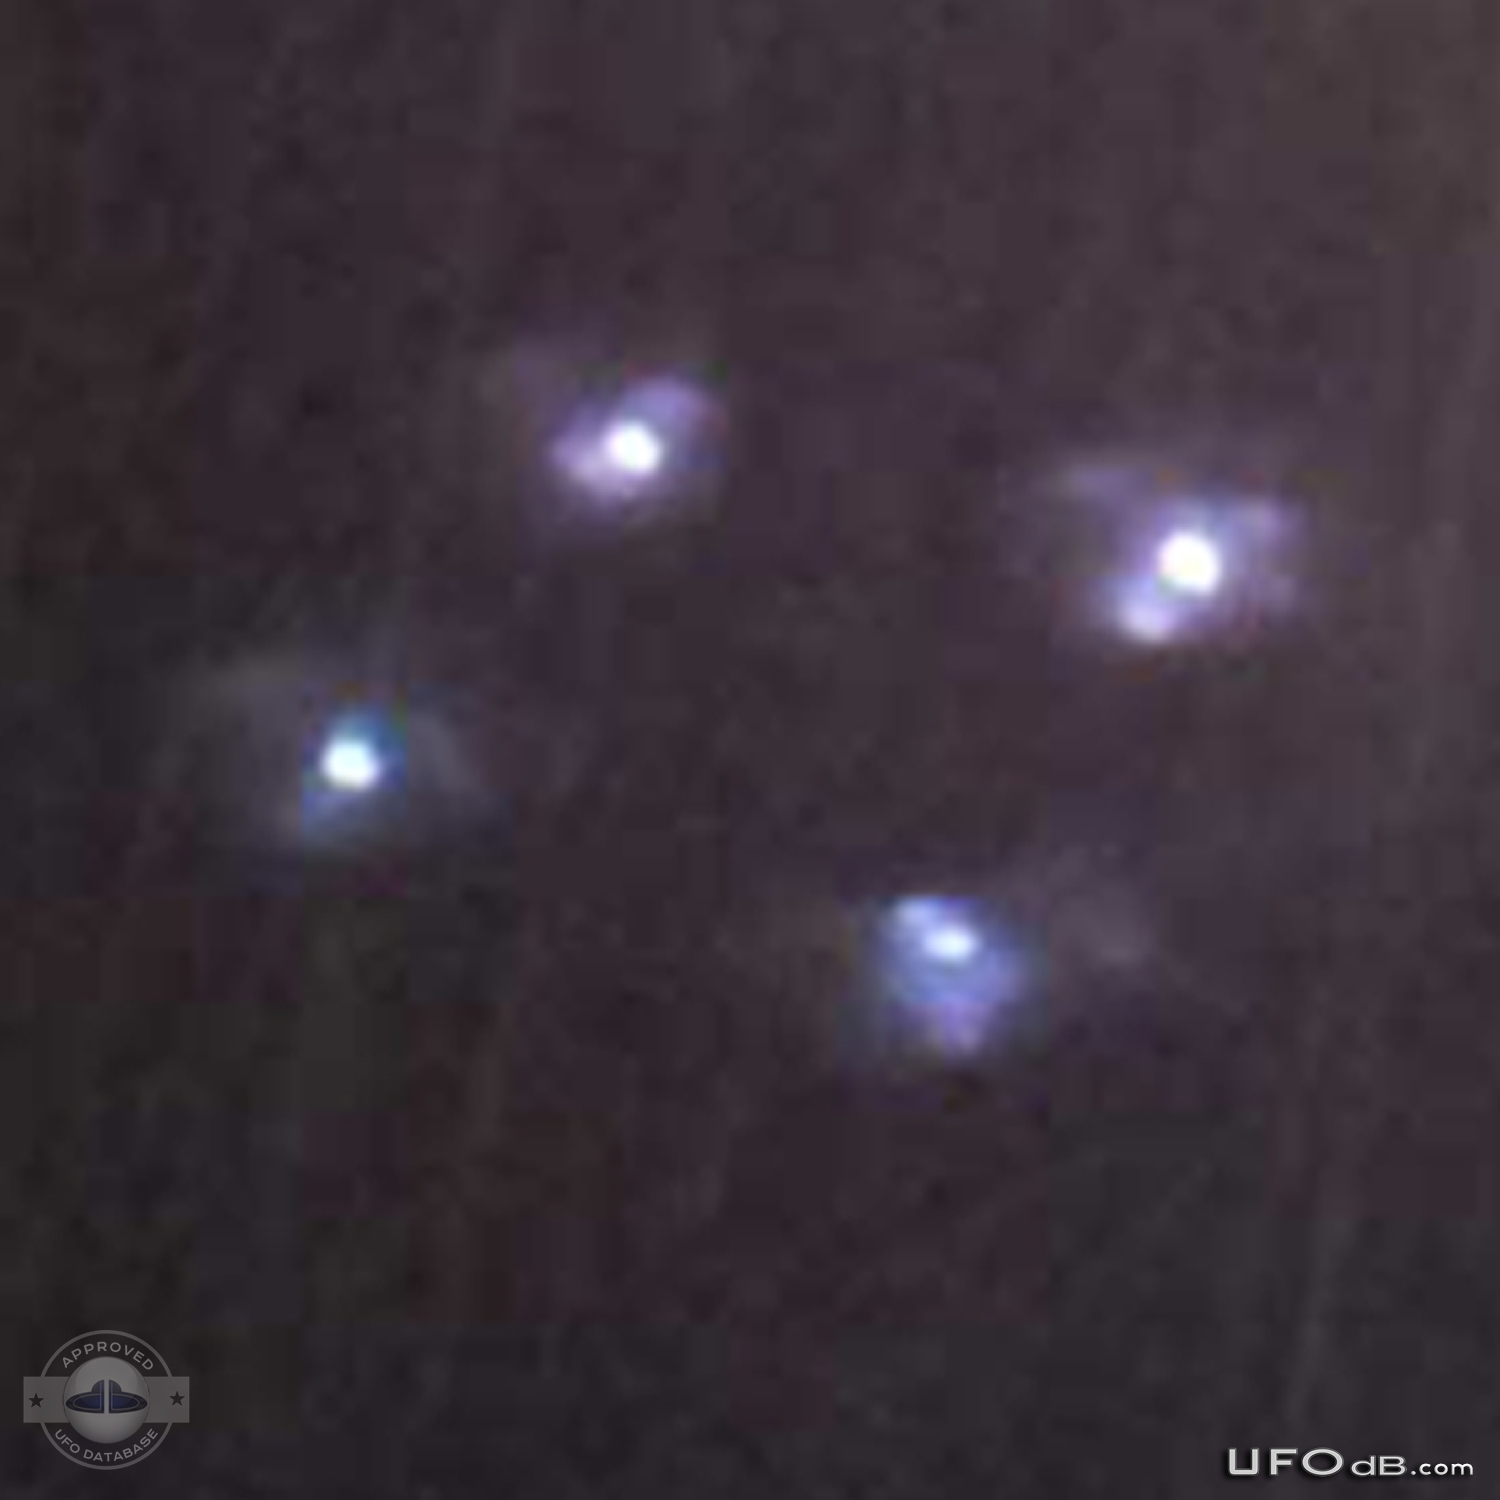 Square shaped UFO caught on picture during heavy rainfall - Rialto CA UFO Picture #384-4